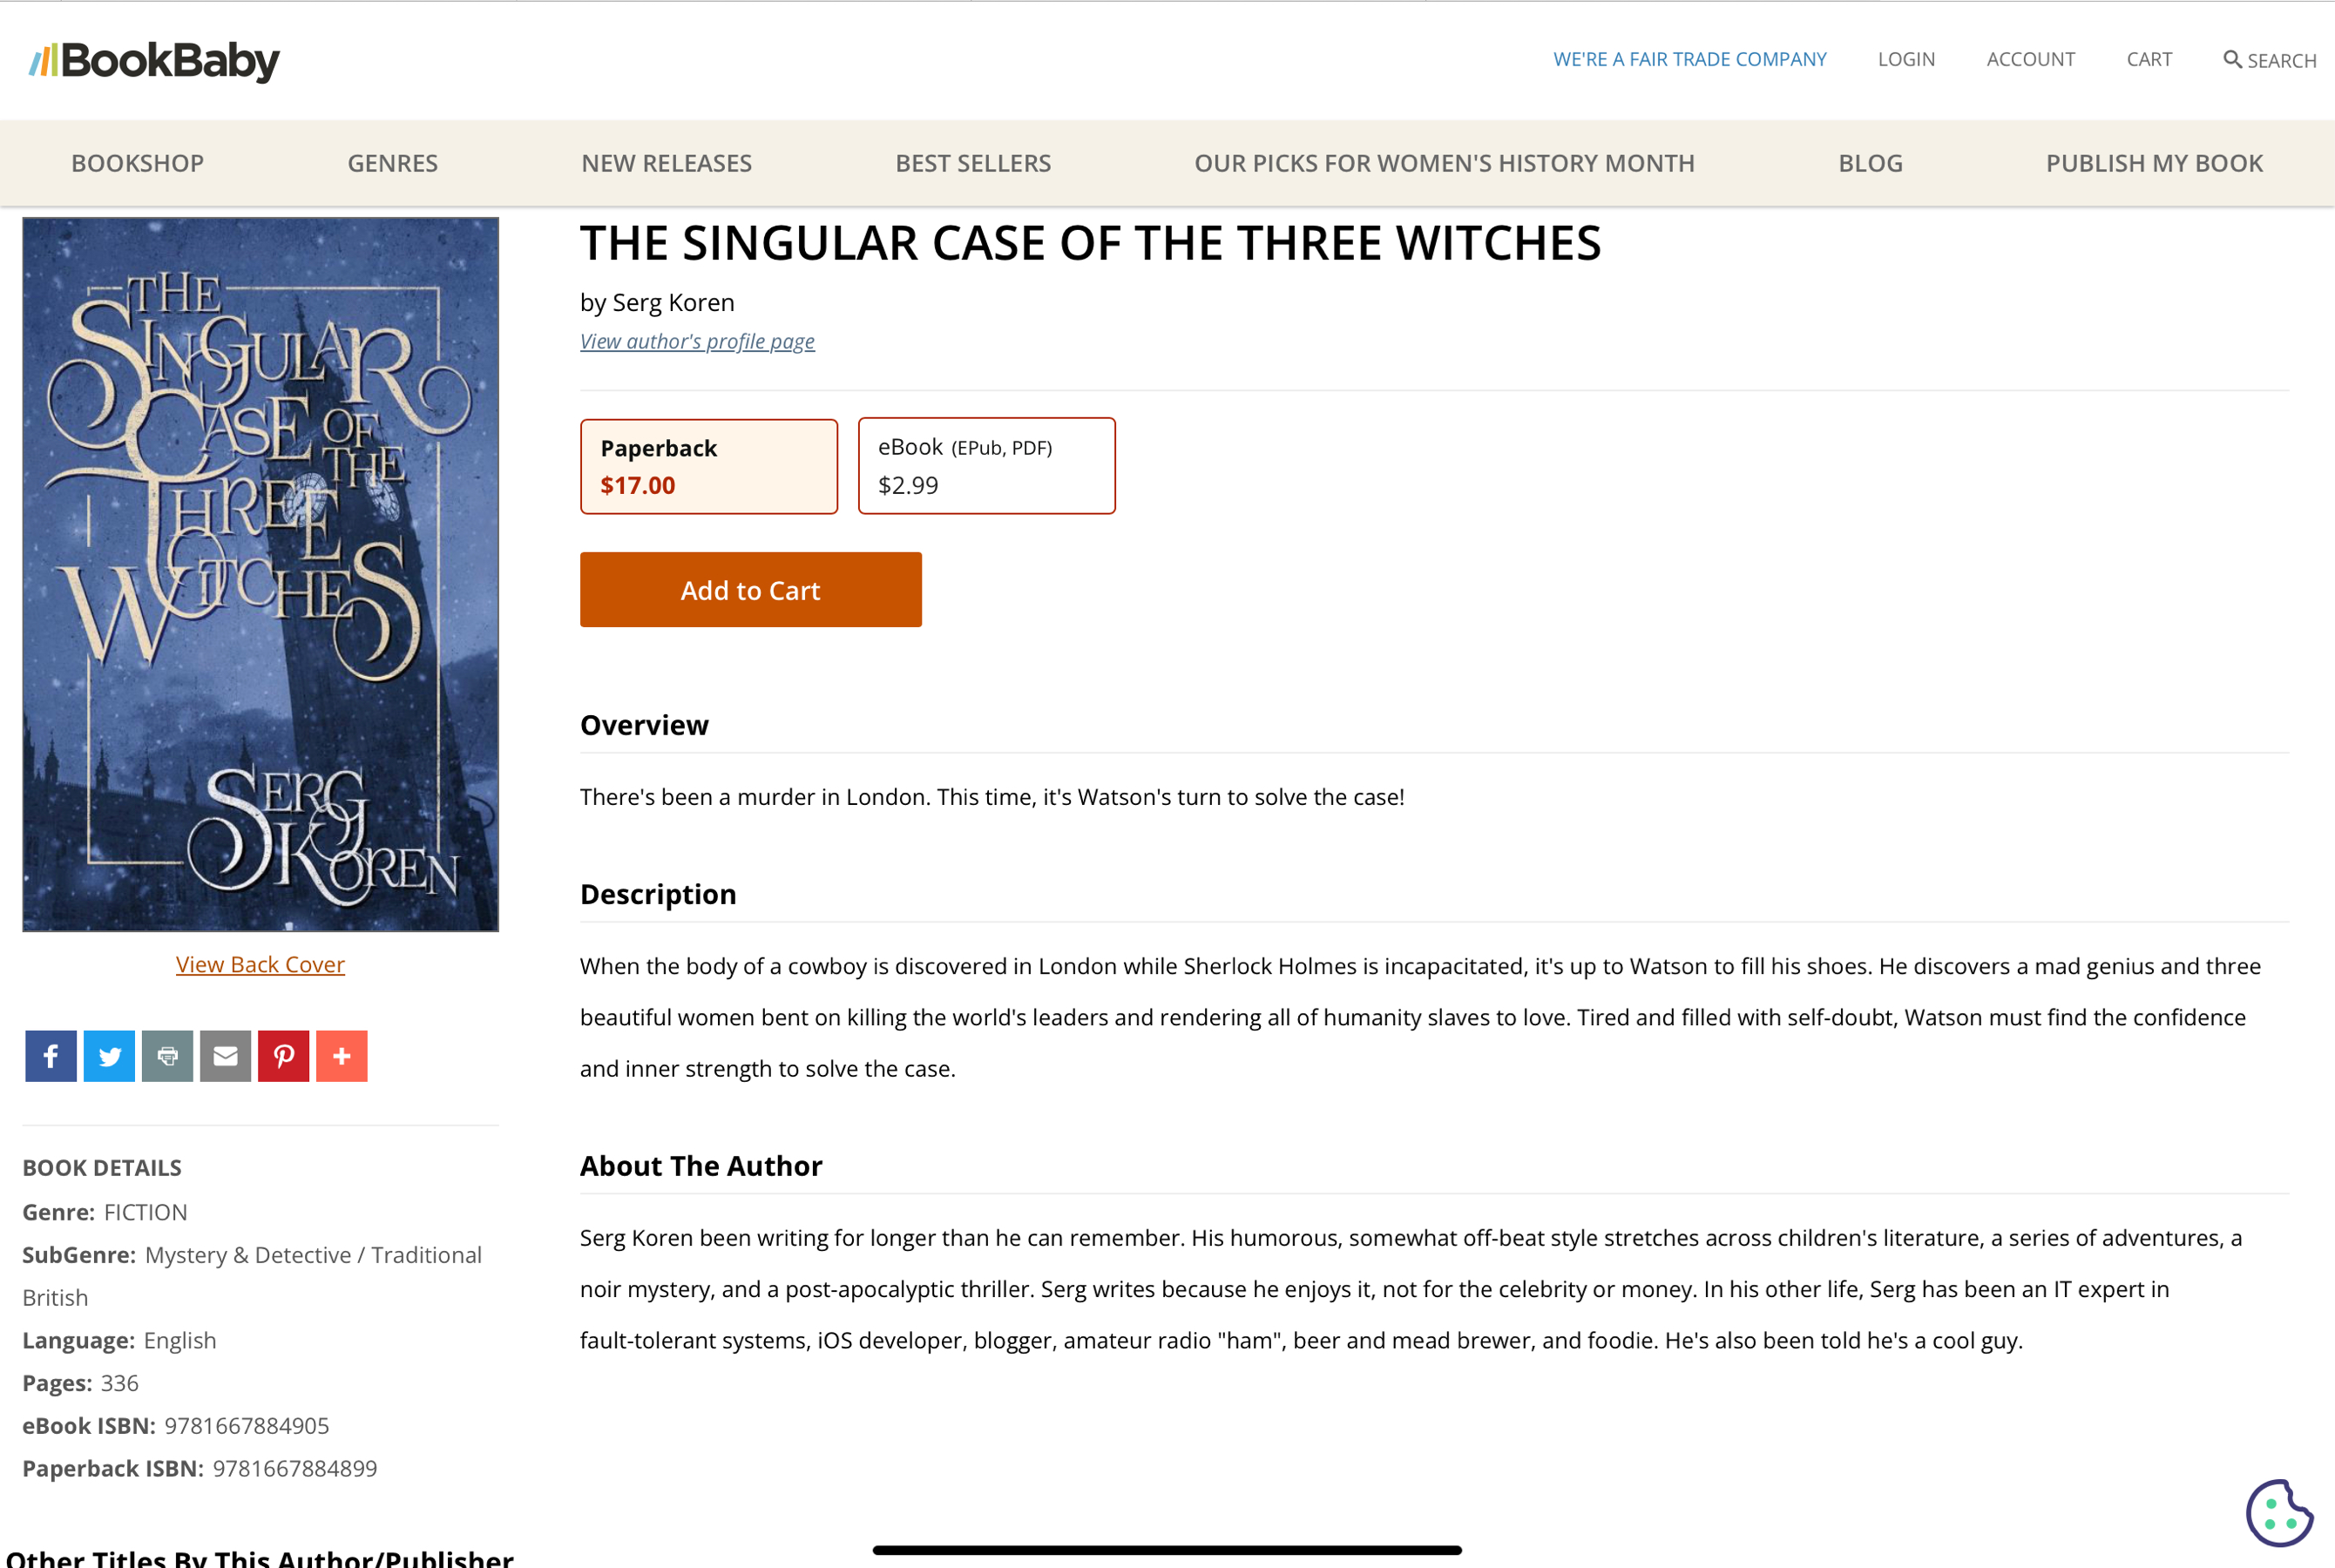 The Singular Case of the Three WItches - webstore